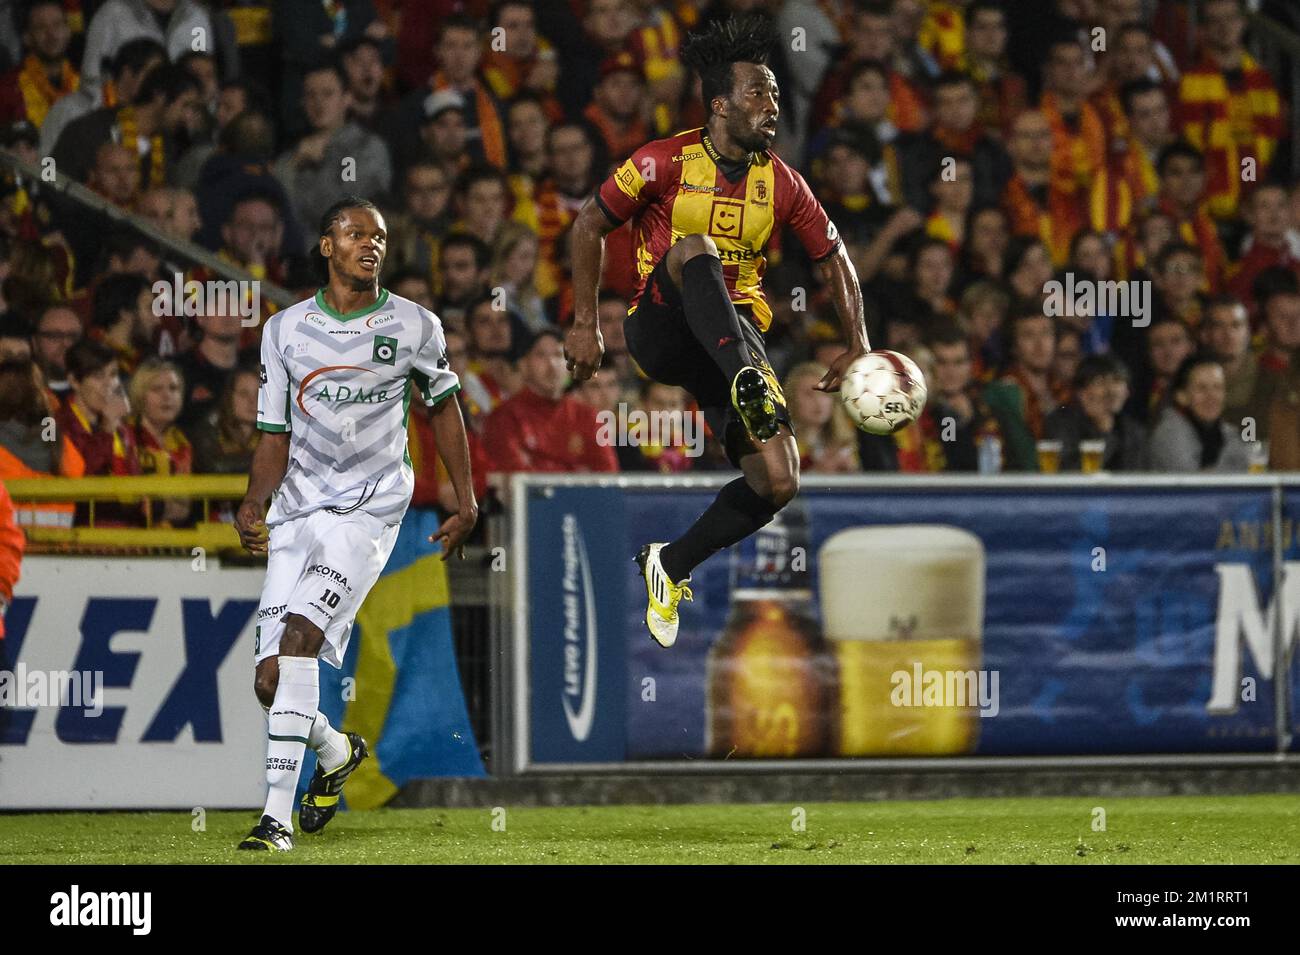 Cercle's Michael Uchebo and Mechelen's Antonio Ghomsi pictured during the Jupiler Pro League match between KV Mechelen and Cercle Brugge, in Mechelen, Saturday 05 October 2013, on day 10 of the Belgian soccer championship.  Stock Photo